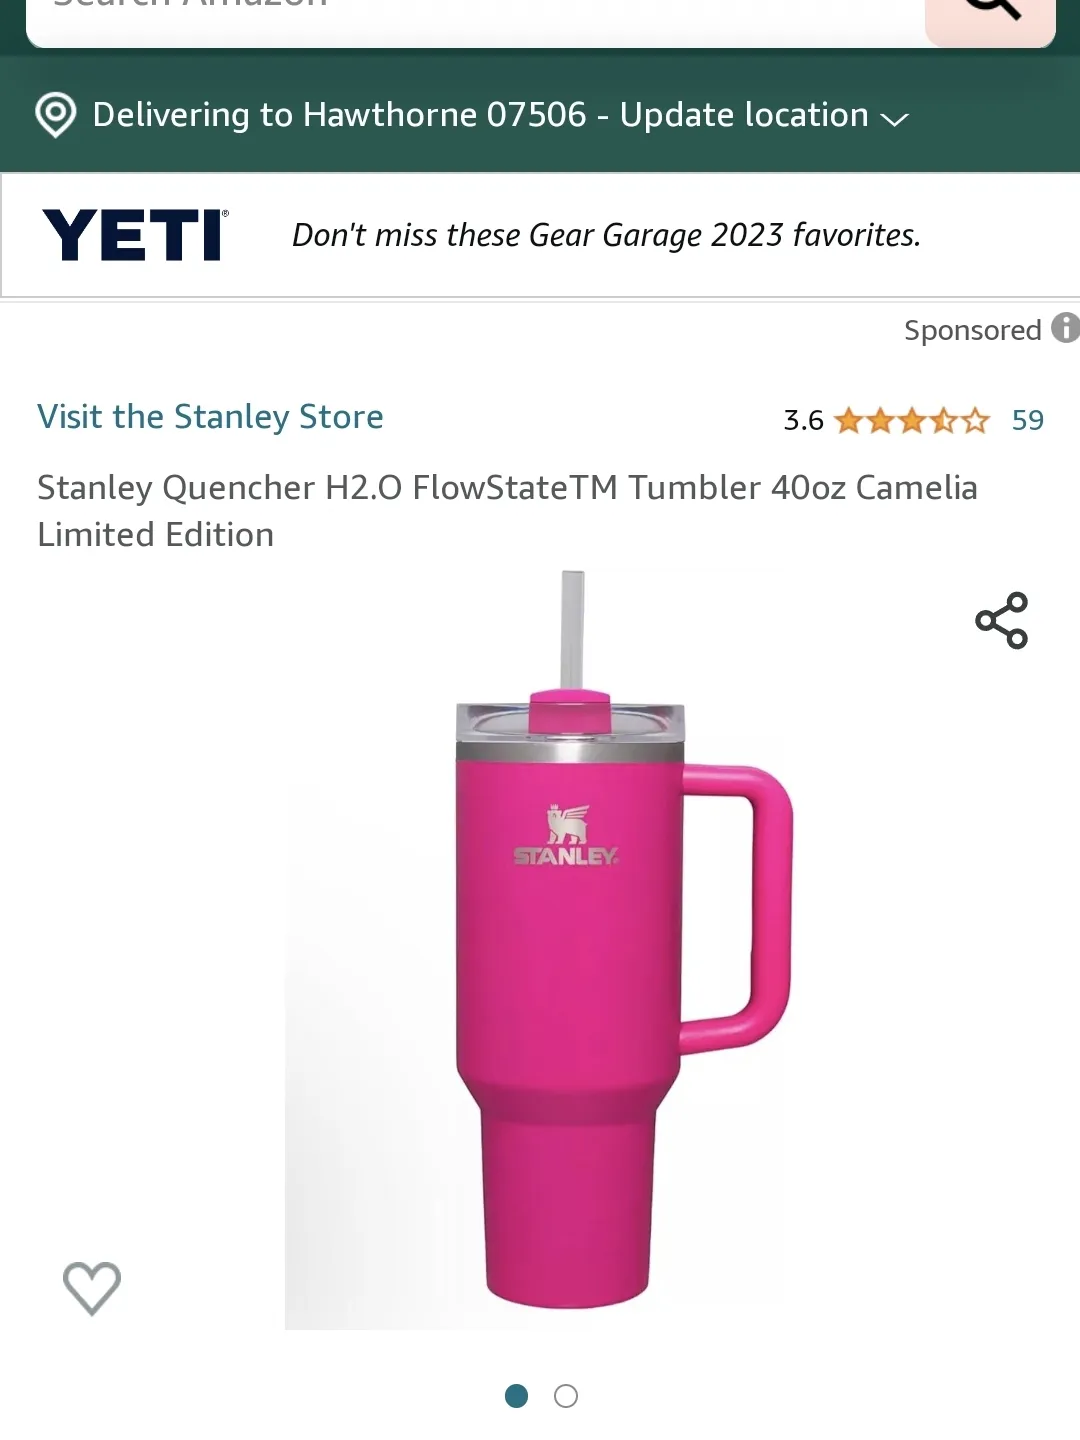 STANLEY Quencher H2.O FlowStateTM Tumbler 40oz Camelia Limited Edition